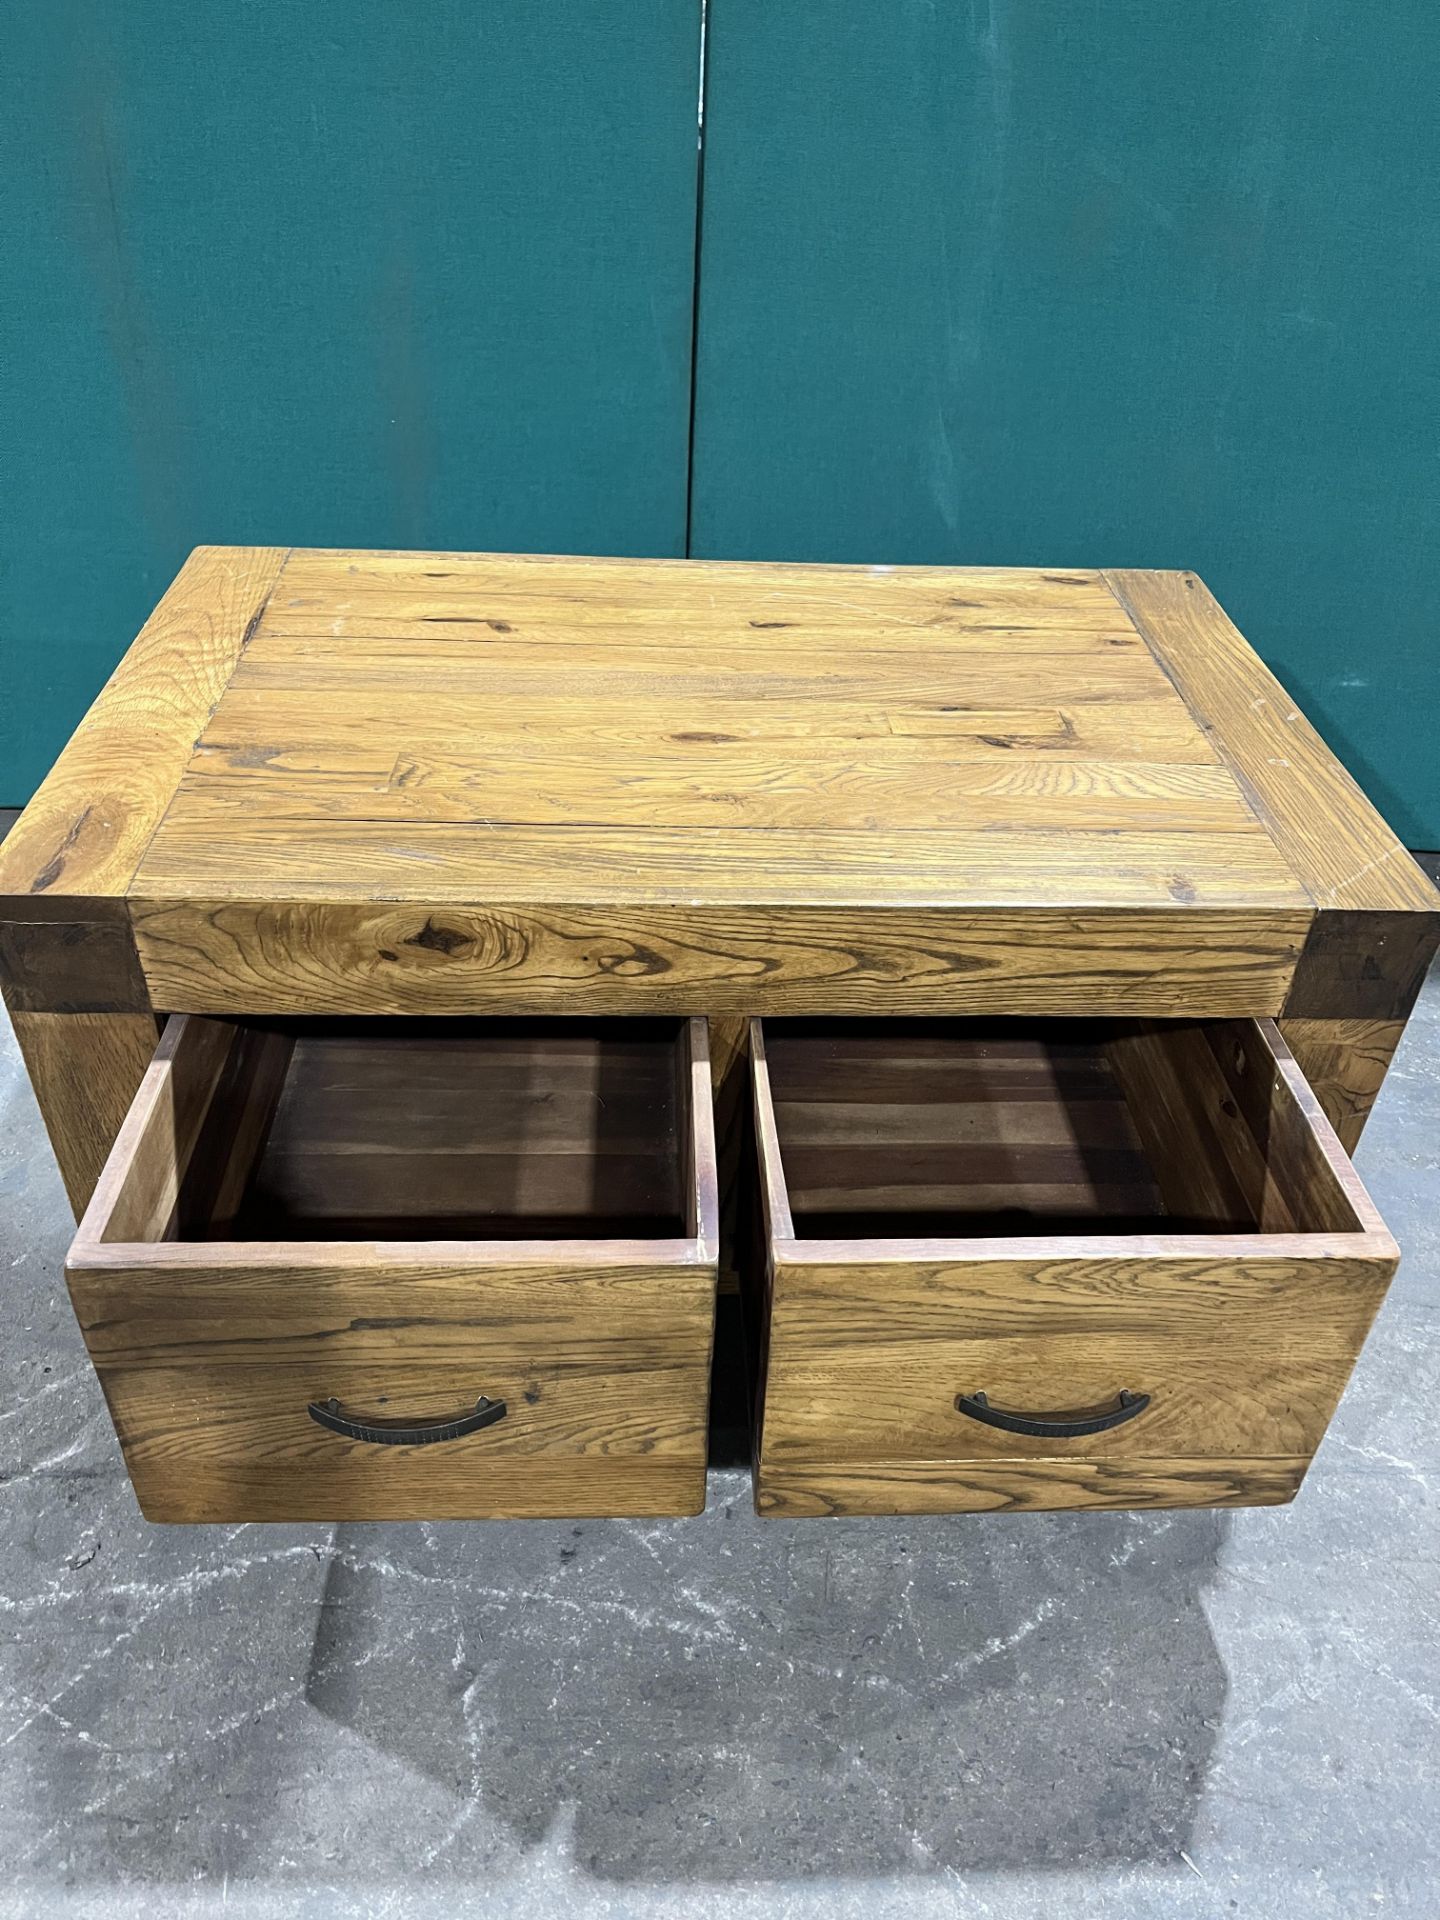 Oak Coffee Table w 2 Drawers - Image 2 of 4